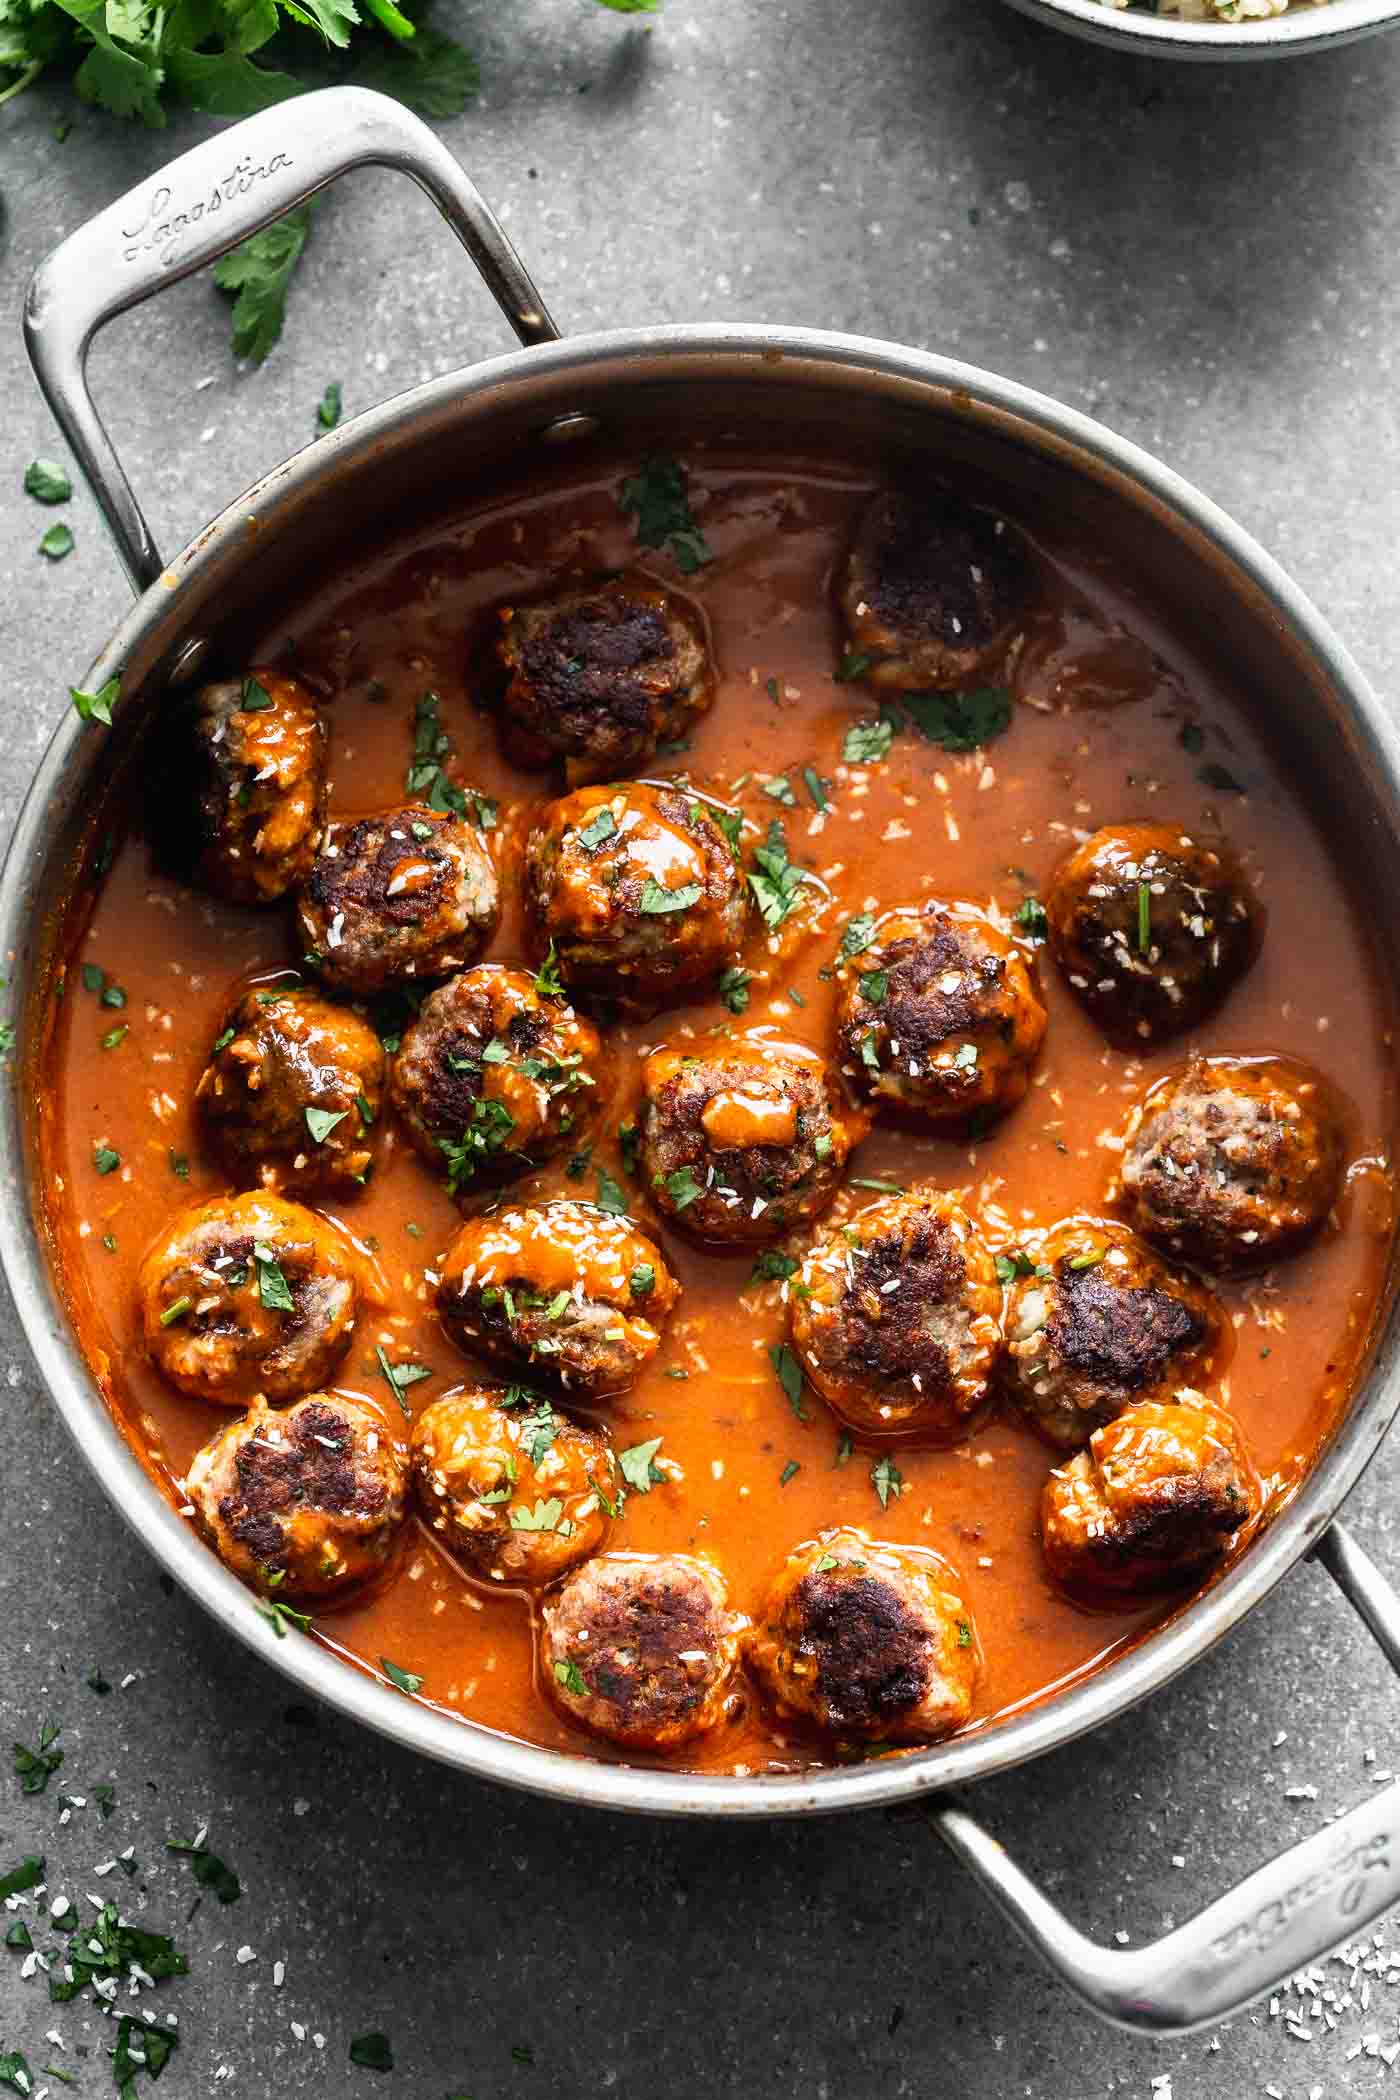 These Coconut Curry Meatballs require minimal ingredients, but have SO much flavor. They're packed with garlic, ginger, onion and cilantro, browned until crisp, and bathed in a luscious coconut curry sauce. Only 30 minutes from start to finish! 